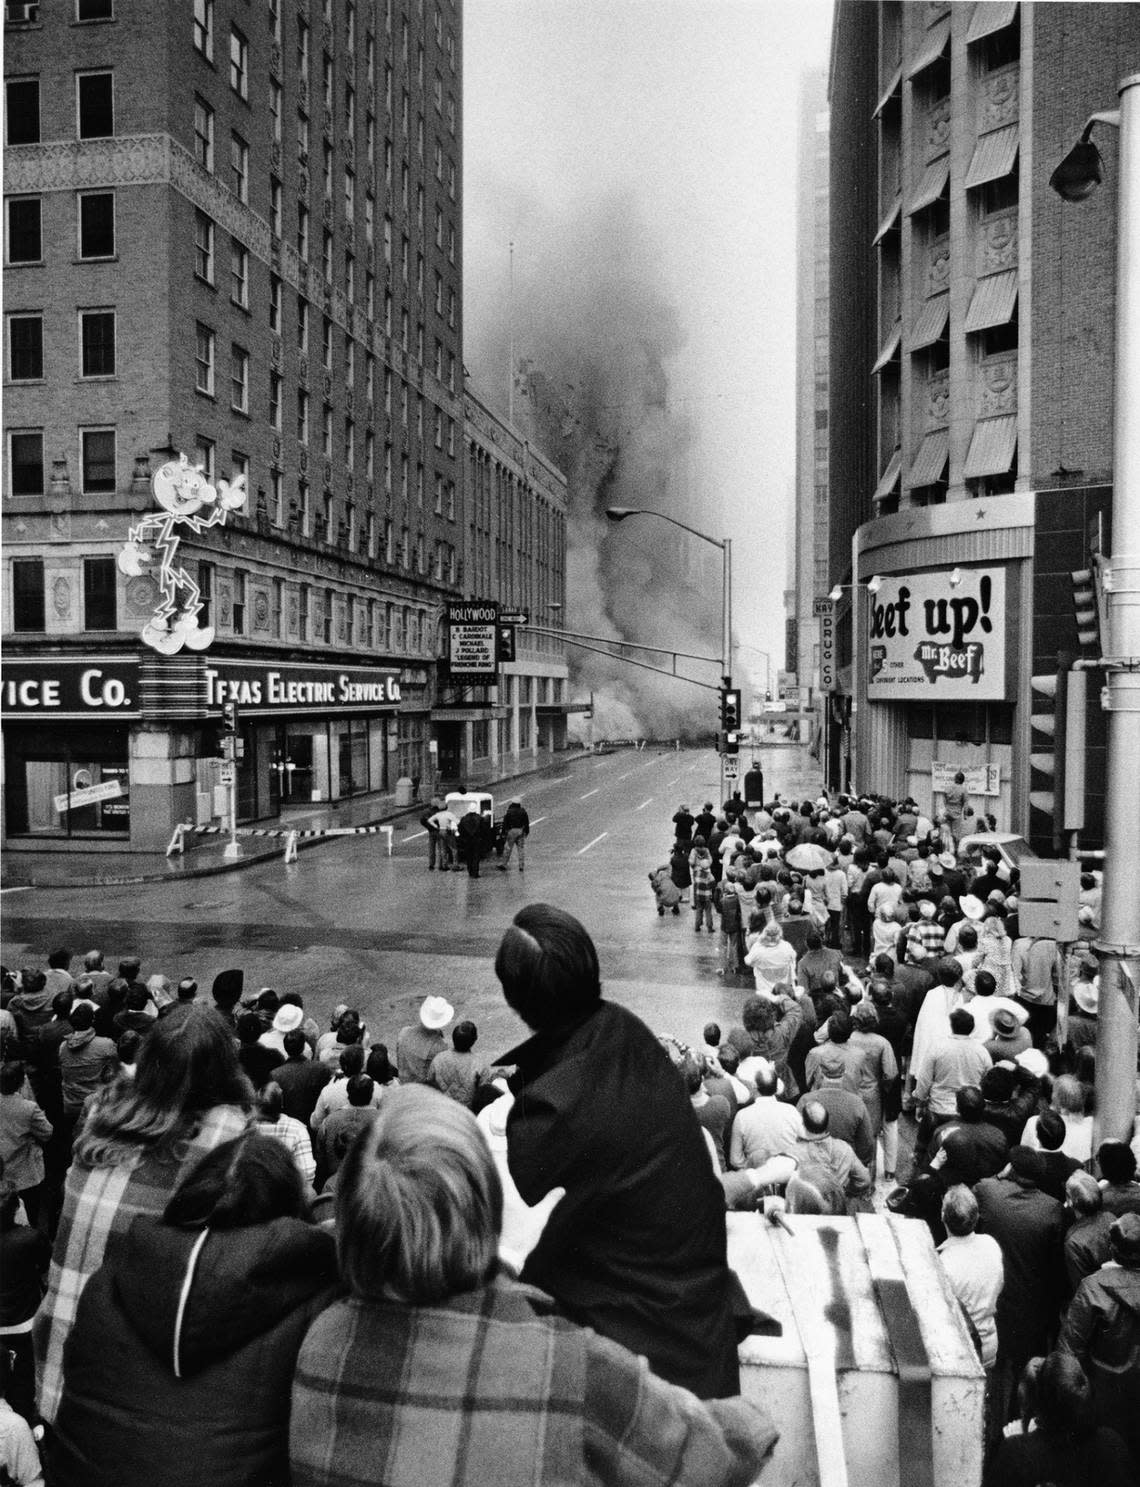 Implosion of the Worth Hotel seen by crowd from 7th Street at Burnett Park, Oct. 29, 1972. On the left there is a electric sign that reads “Texas Electric Service Co.” On the far right is an ad for “Mc Beef.”